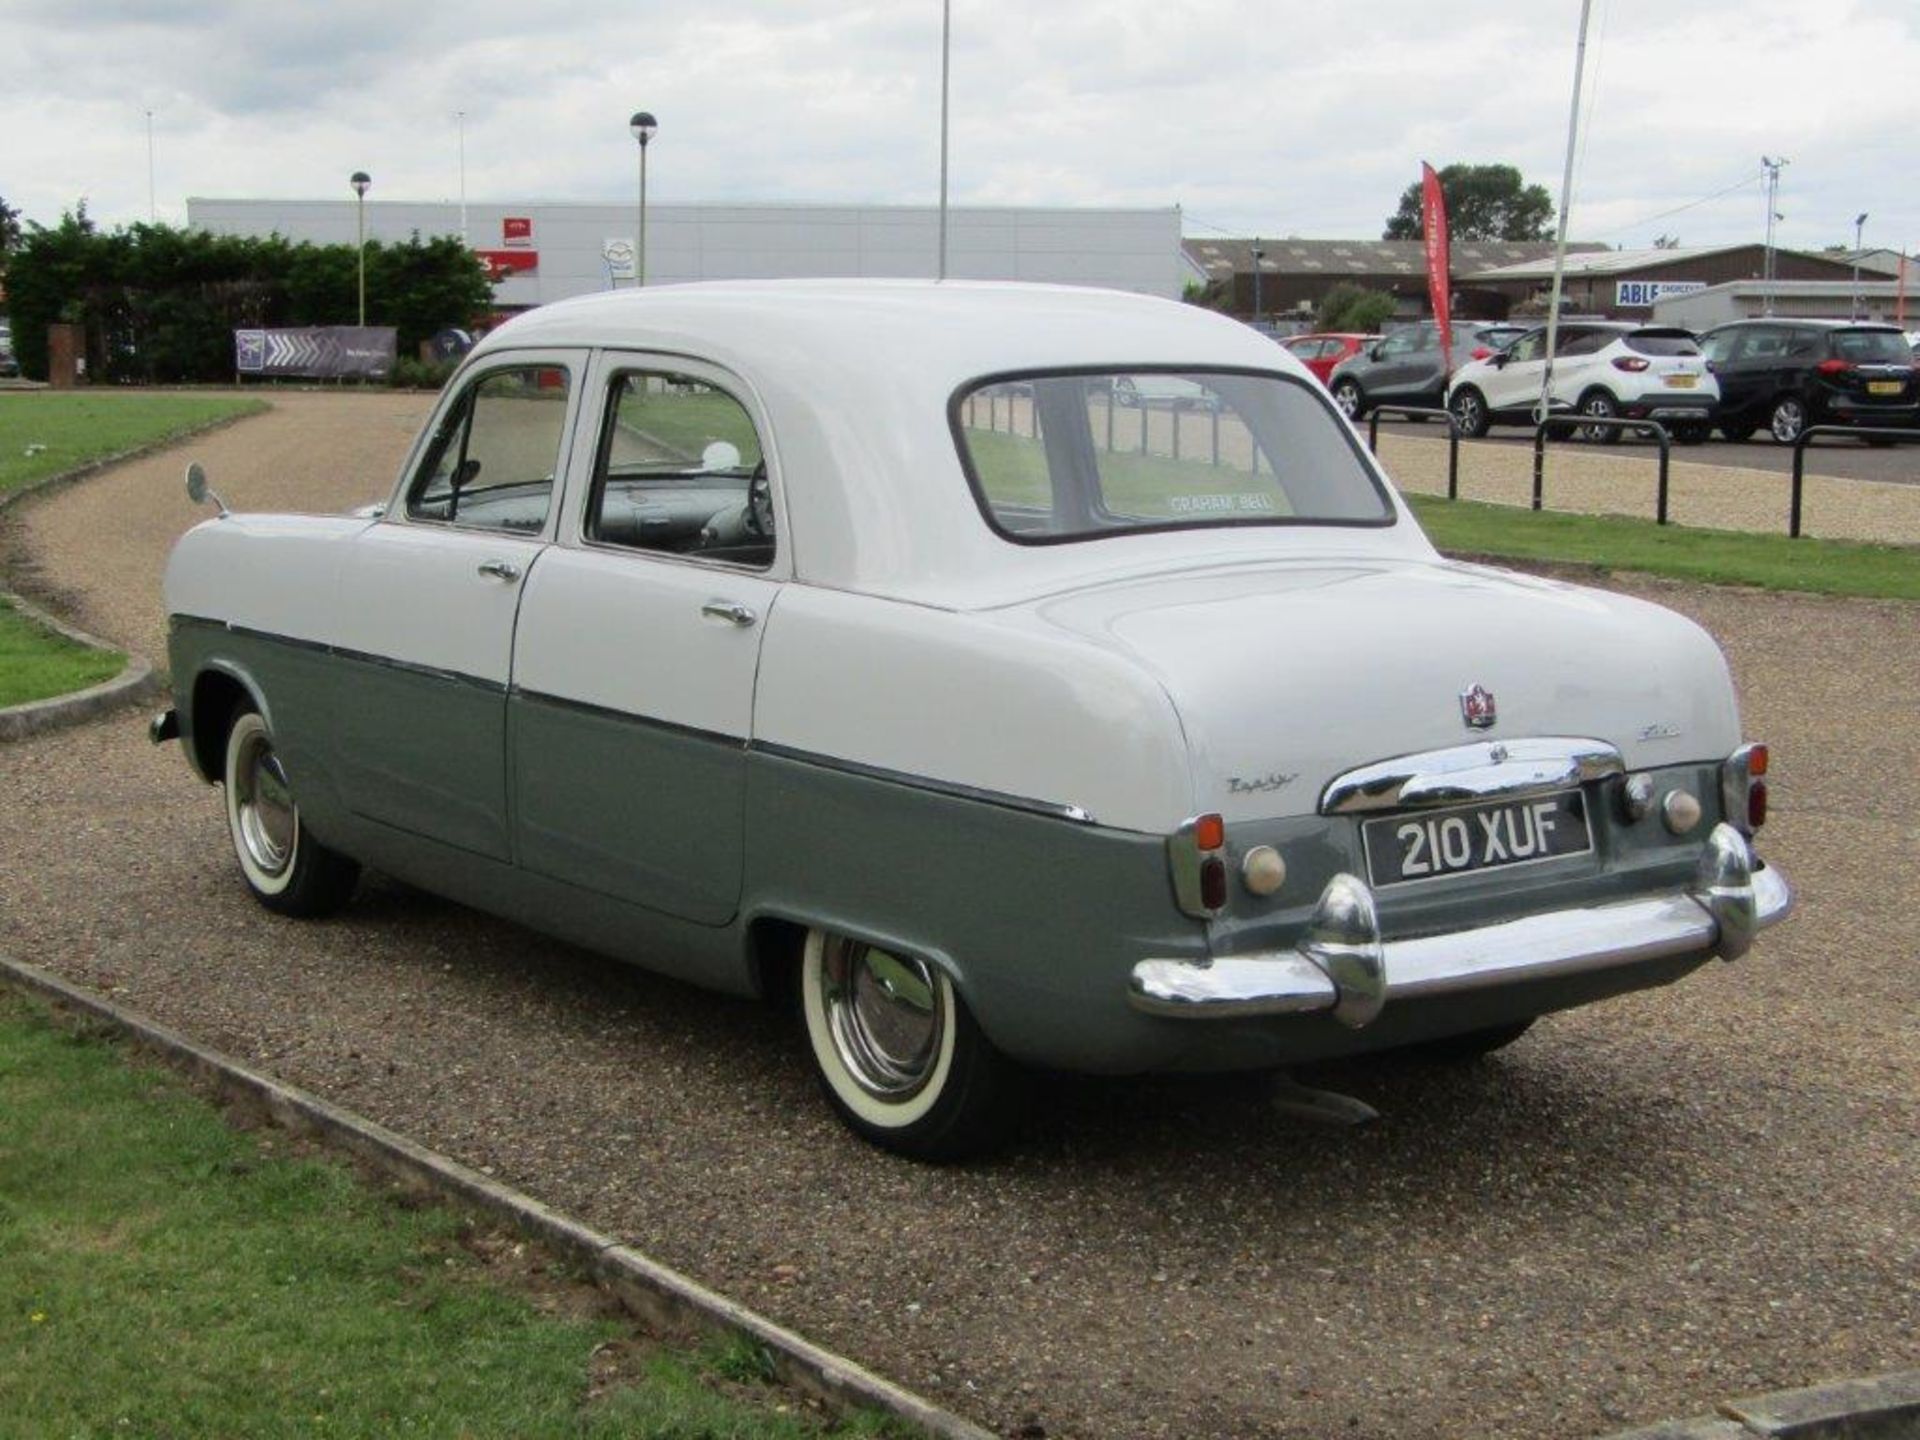 1956 Ford Zephyr 6 Saloon - Image 4 of 10